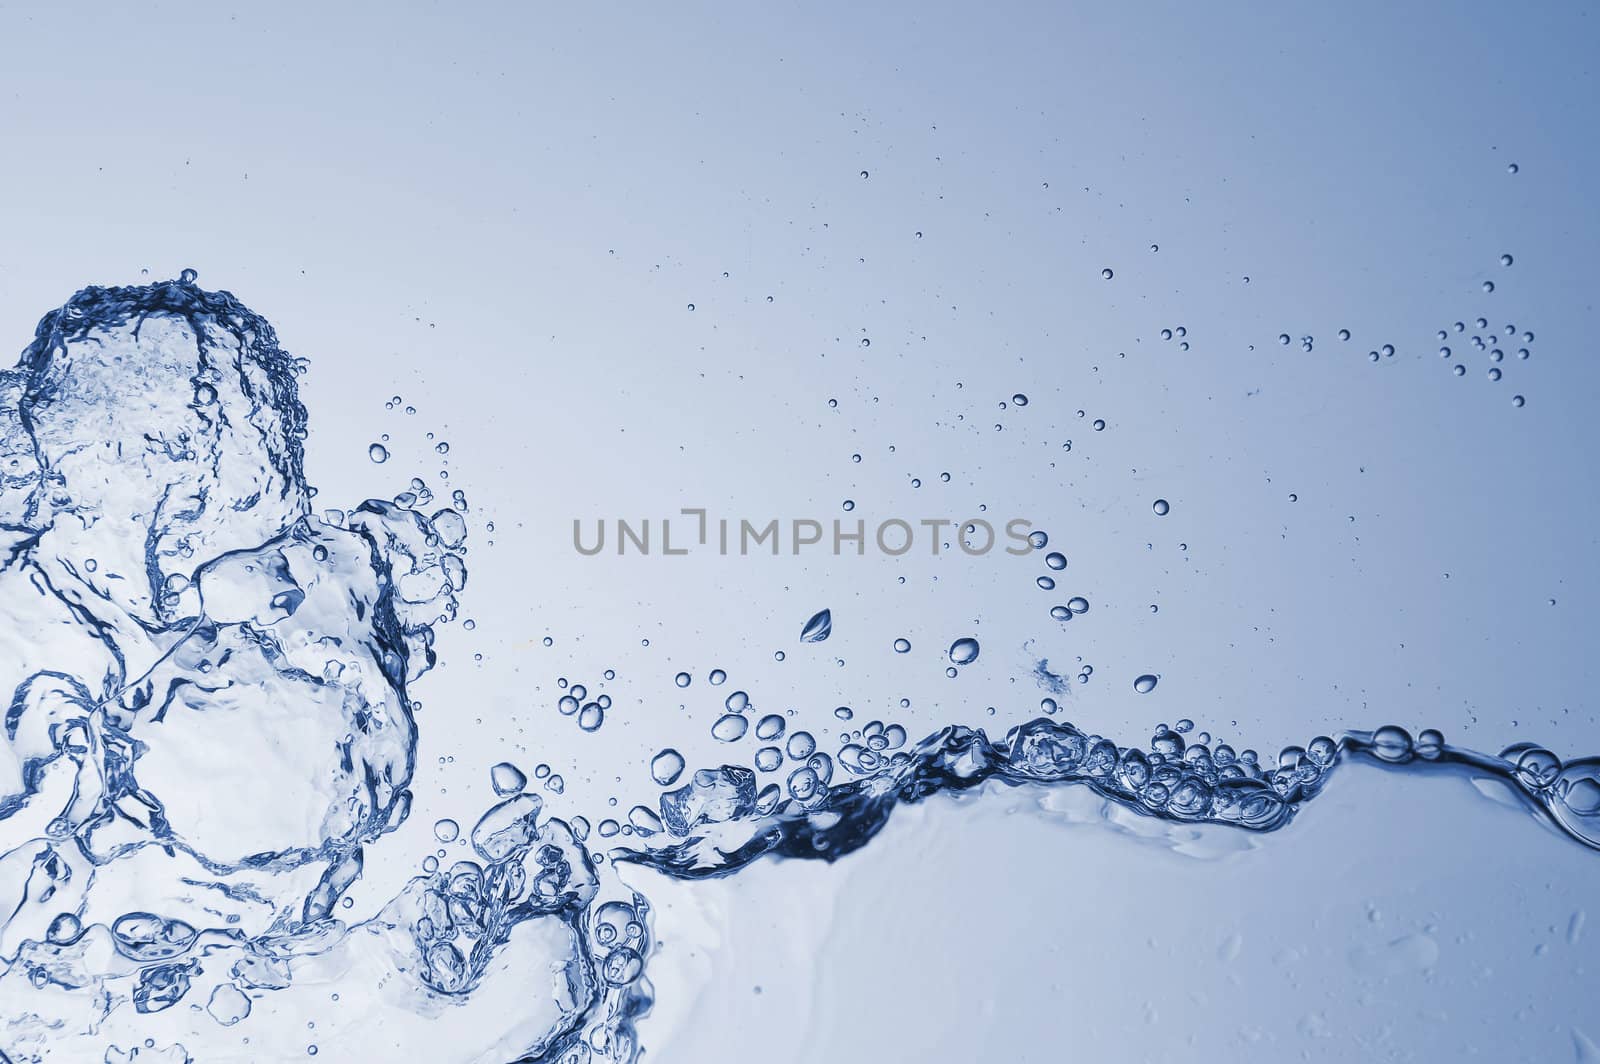 Abstract blue wave splash background by bugno